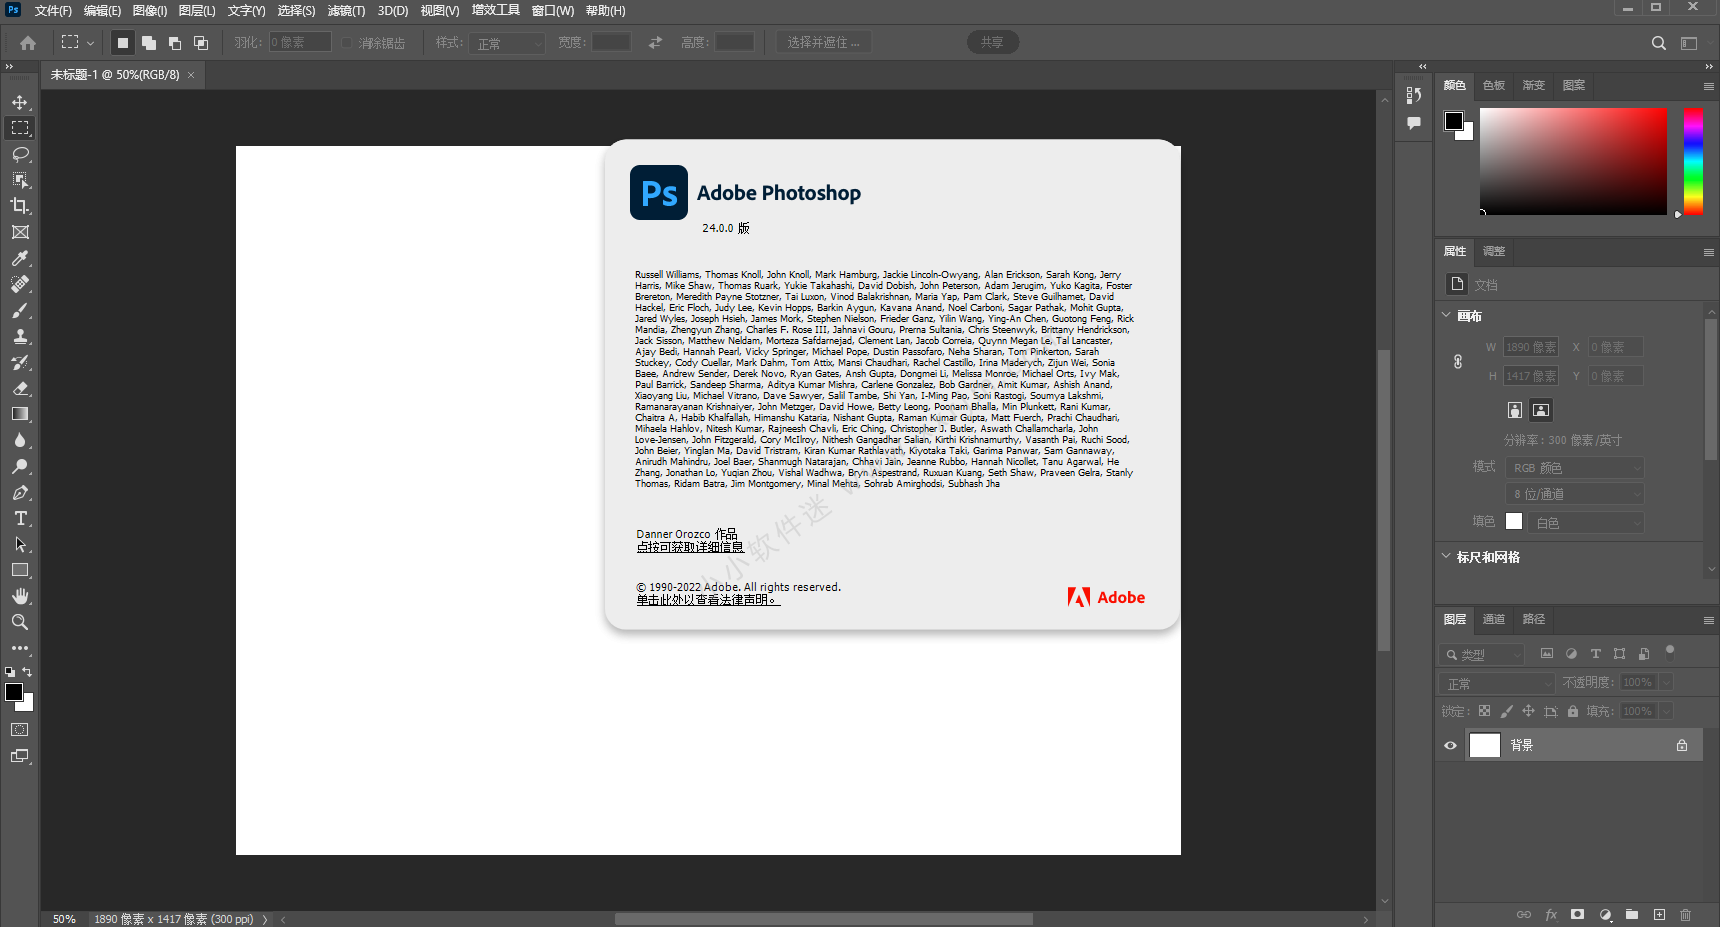 Adobe Photoshop 2023 v24.6.0.573 download the new for windows